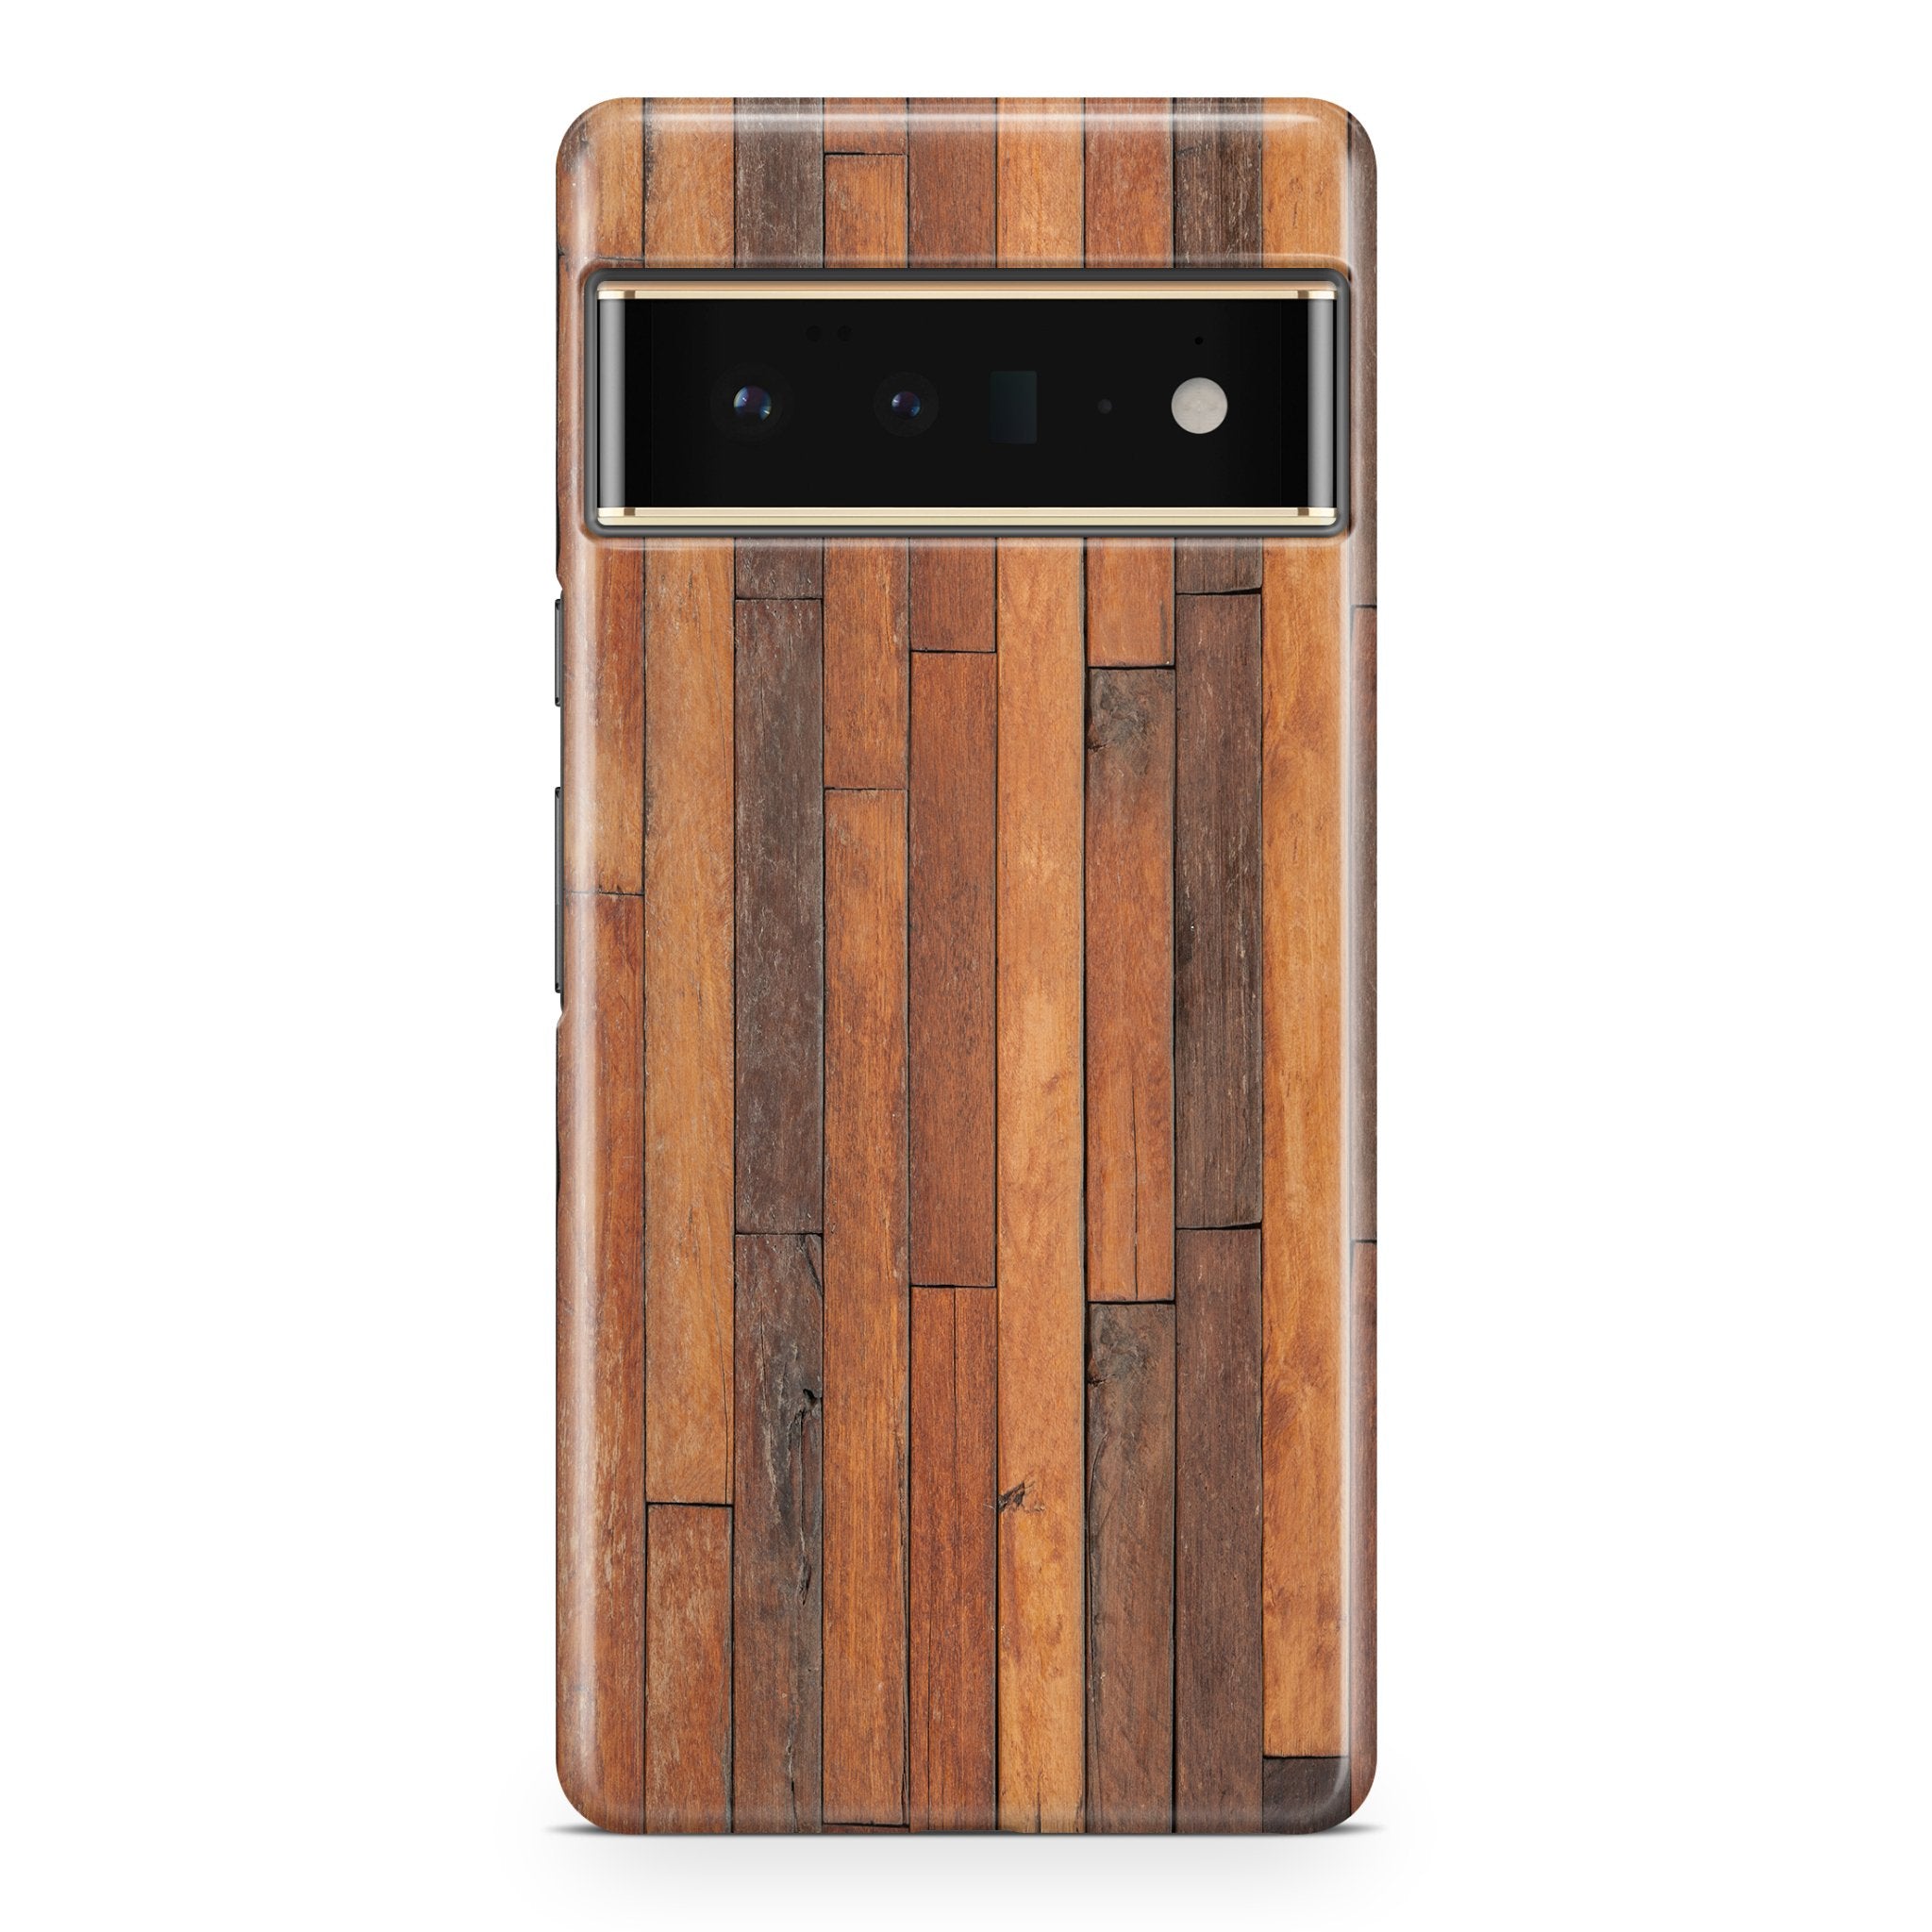 Rustic Steps - Google phone case designs by CaseSwagger